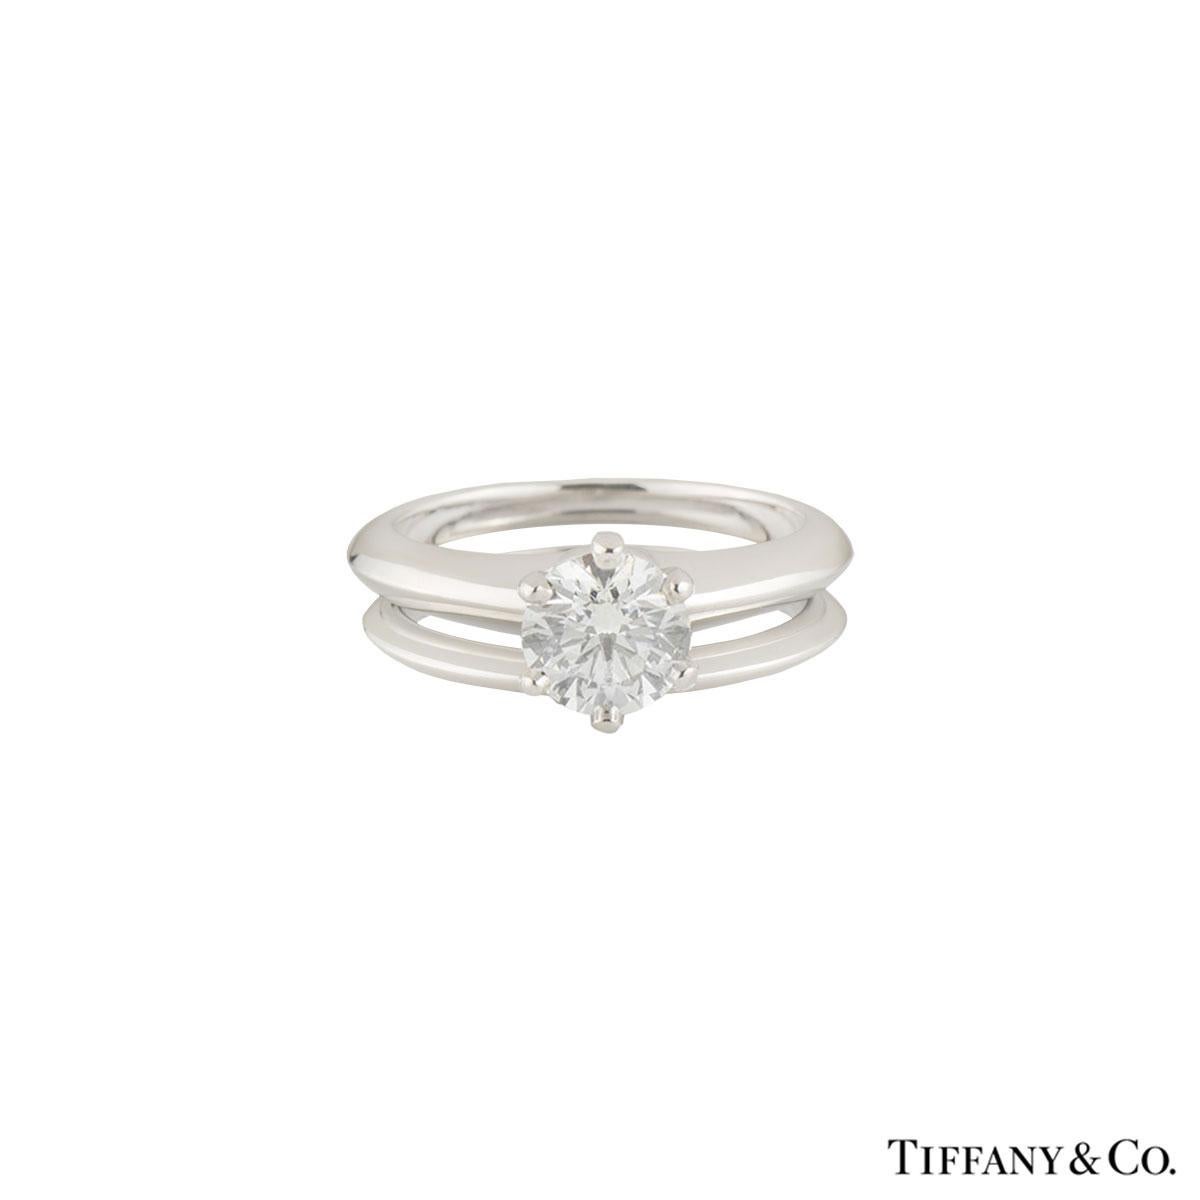 A beautiful platinum Tiffany & Co. diamond engagement ring from the setting collection. The engagement ring comprises of a round brilliant cut diamond in a 6 claw setting with a weight of 2.04ct, E colour and VVS2 clarity. The ring also comes with a